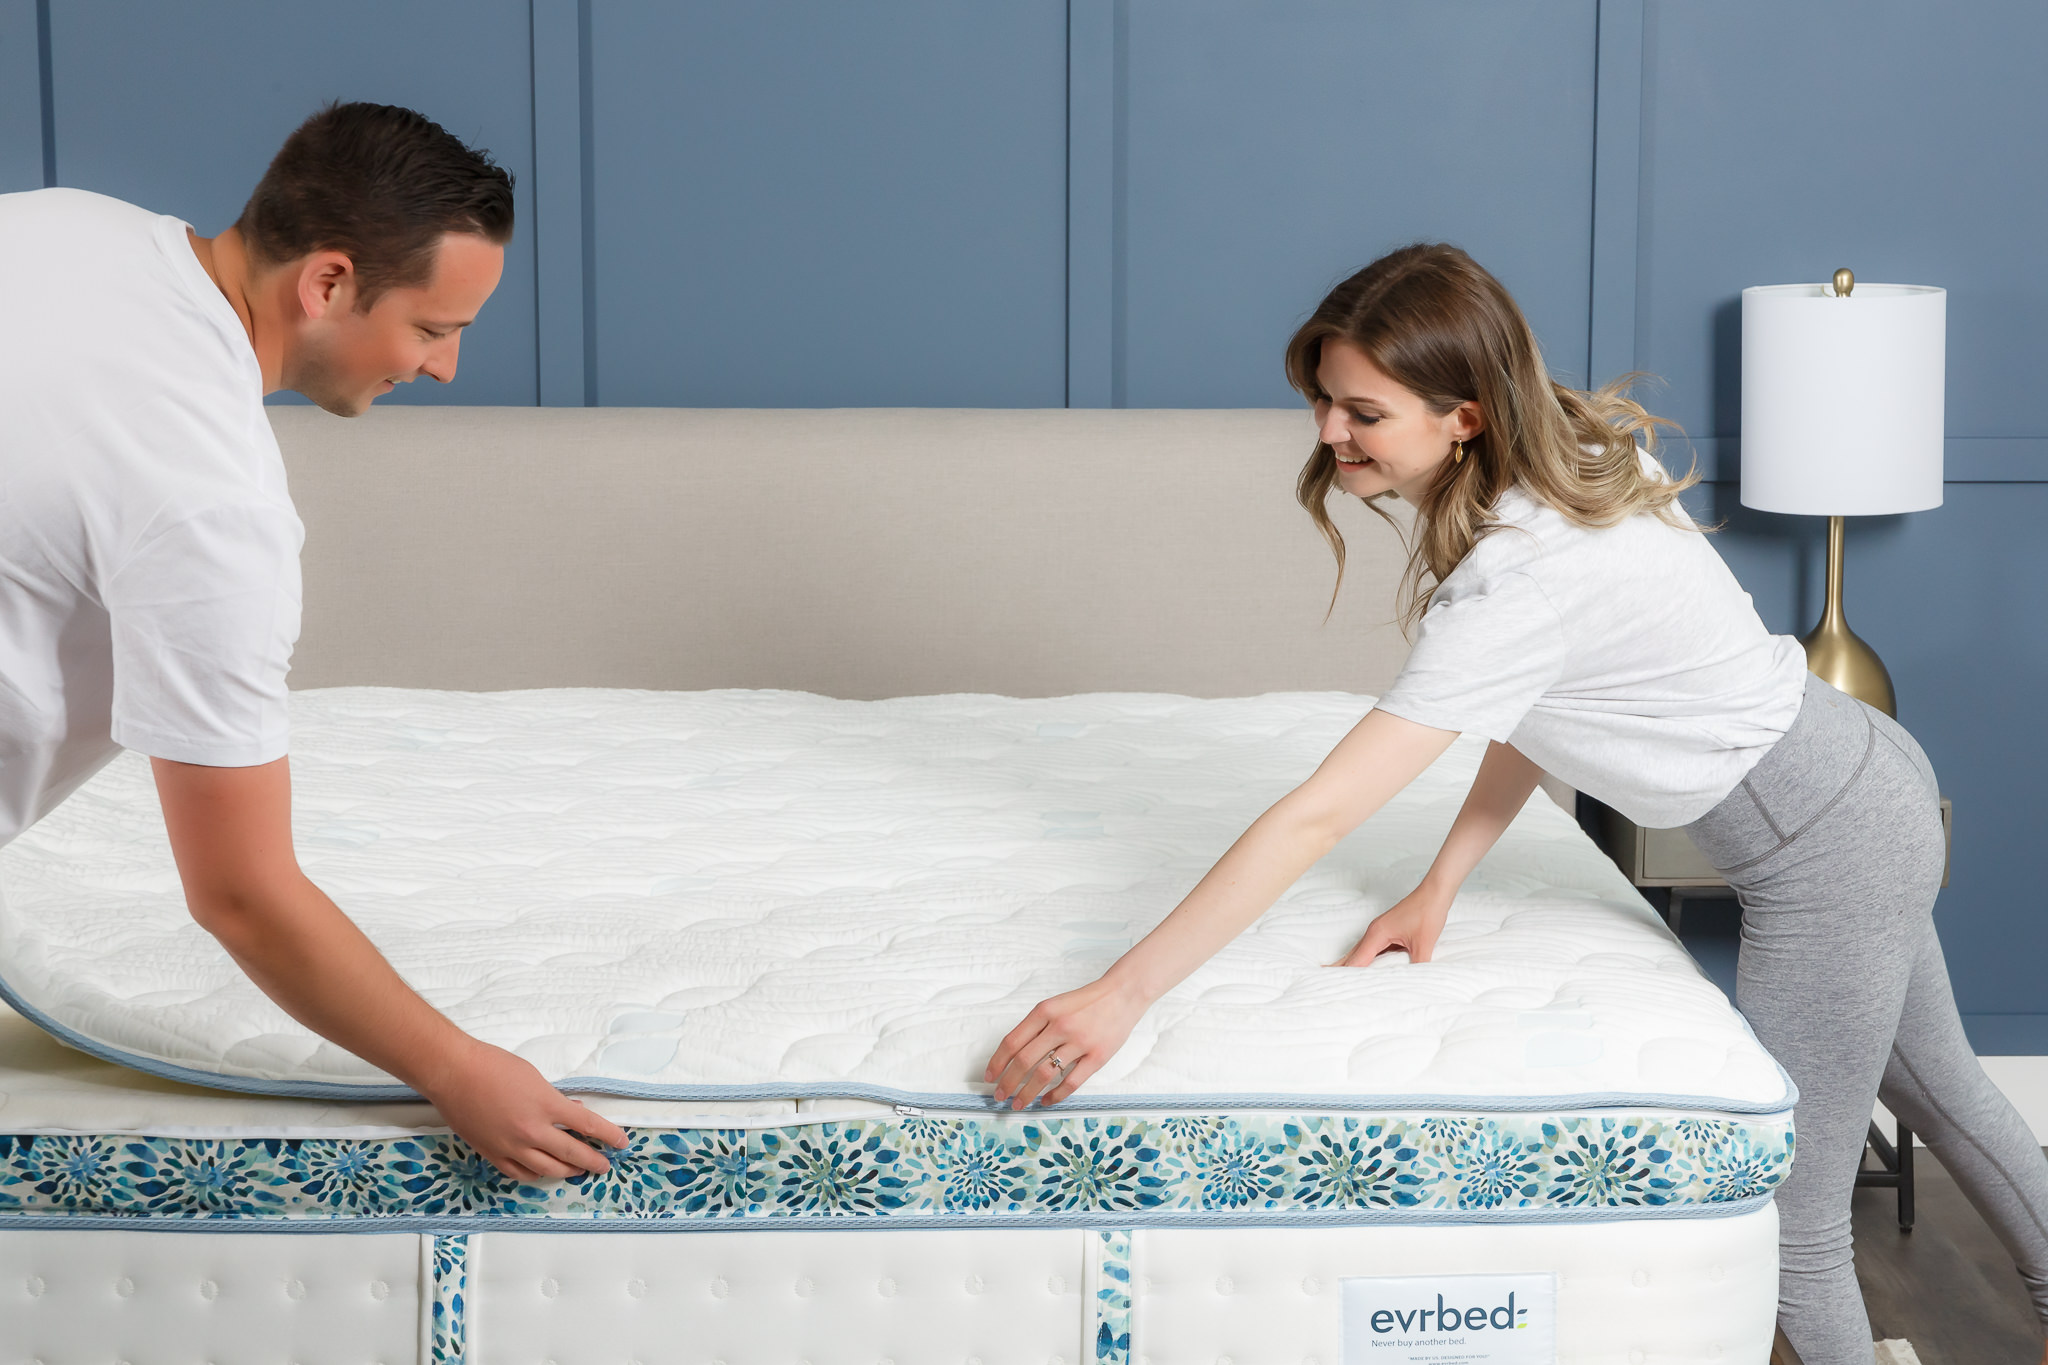 Evrbed: The Re-Invented Mattress Designed Just for You and Your Partner